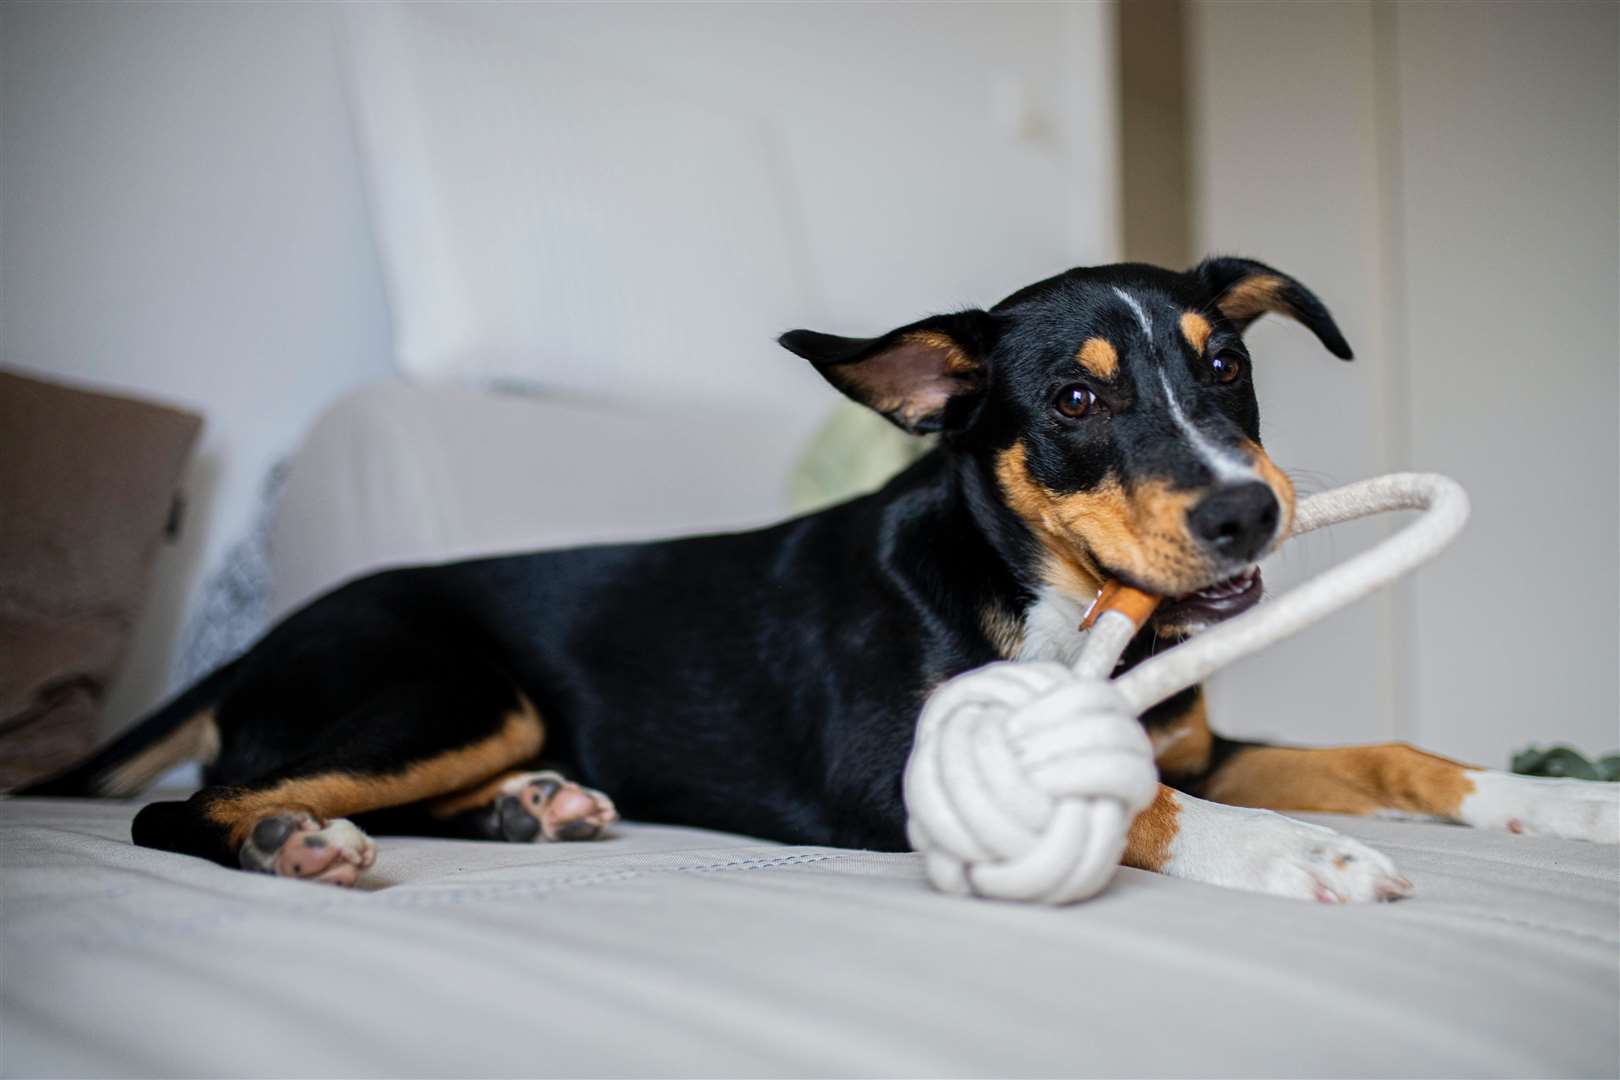 Expert shares toys and activities to keep your pup mentally stimulated. Picture: Caspar Camille Rubin